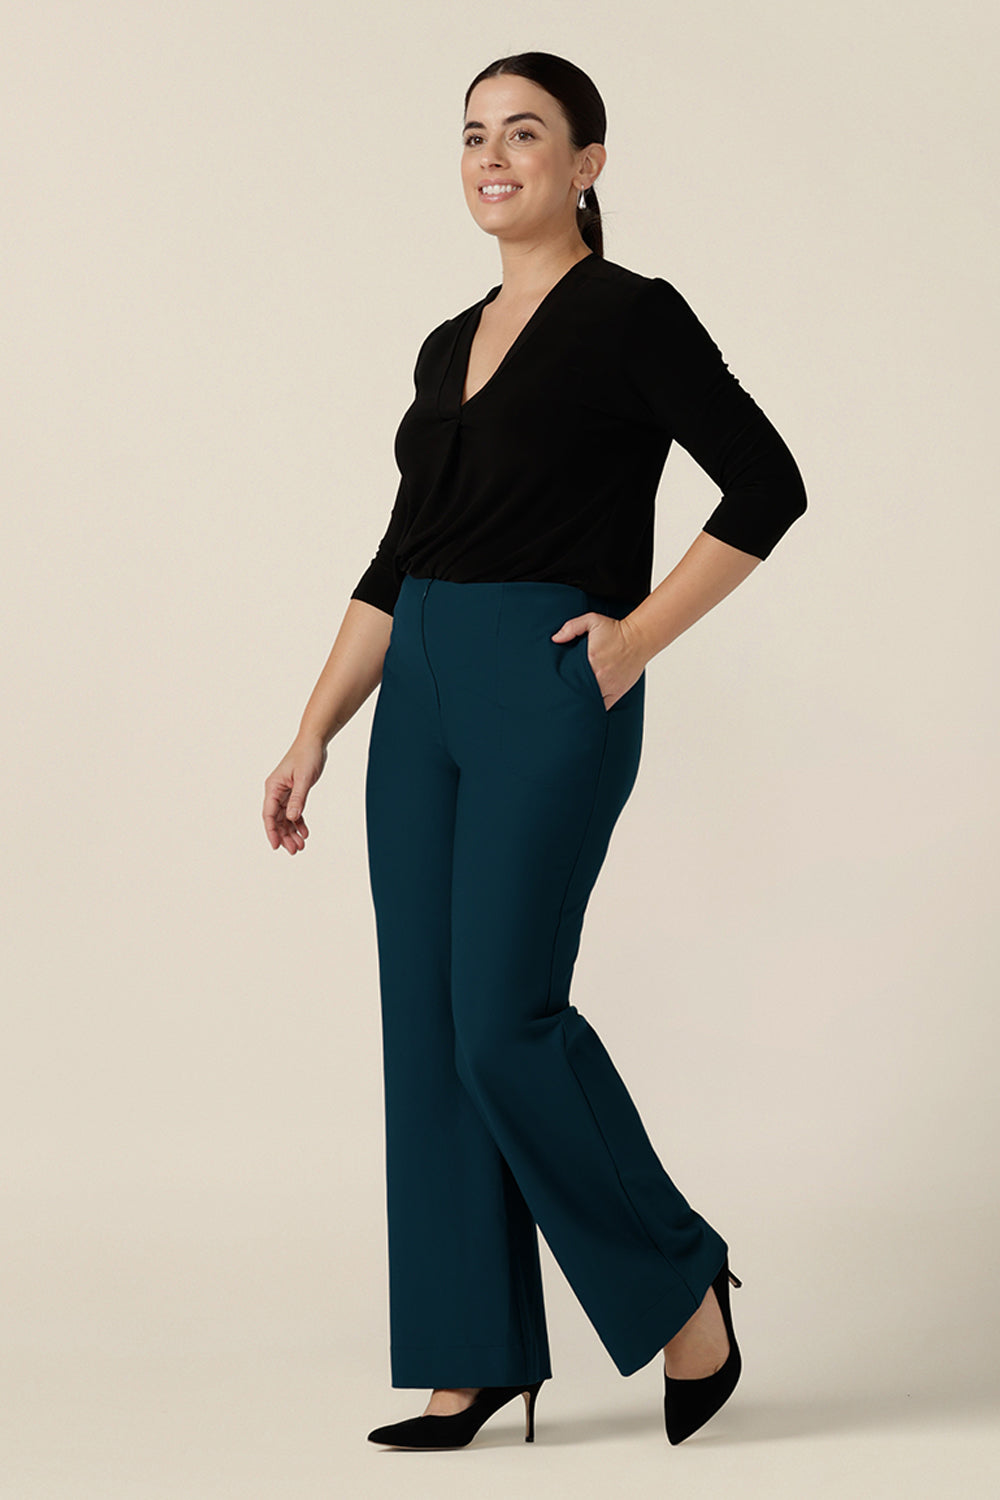 A size 10 woman wears petrol blue, tailored bootcut pants with a long sleeve black jersey top. Made in Australia in ponte fabric, these comfortable work pants are great for corporate women - shop in sizes 8 to 24.